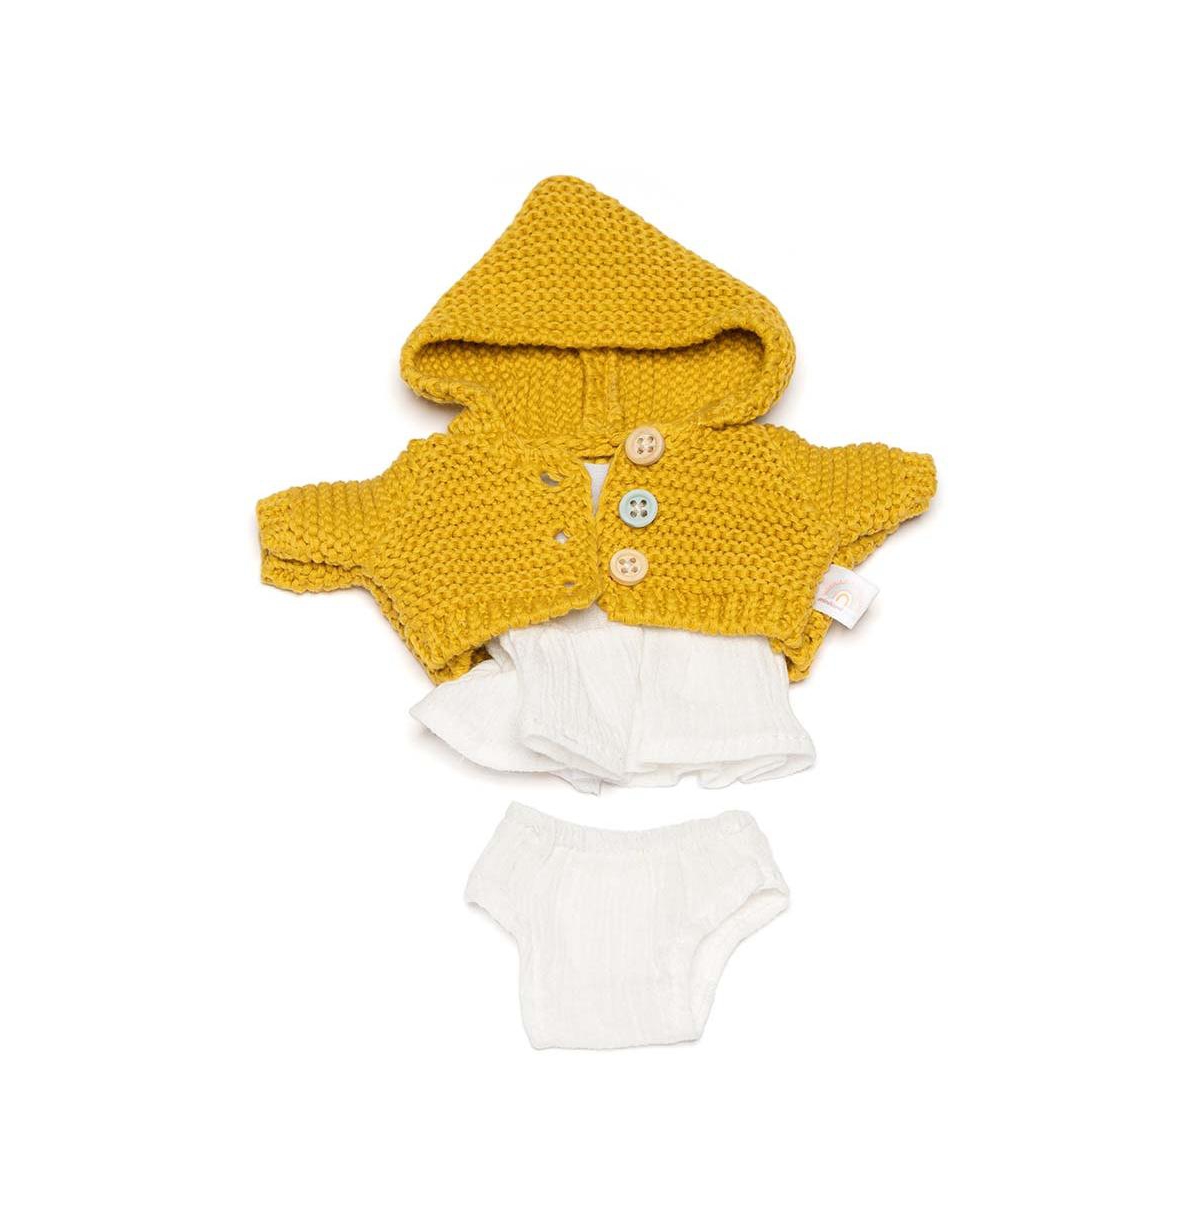 Miniland Sea 8.25" Girl Clothing Toy Set In Yellow And White